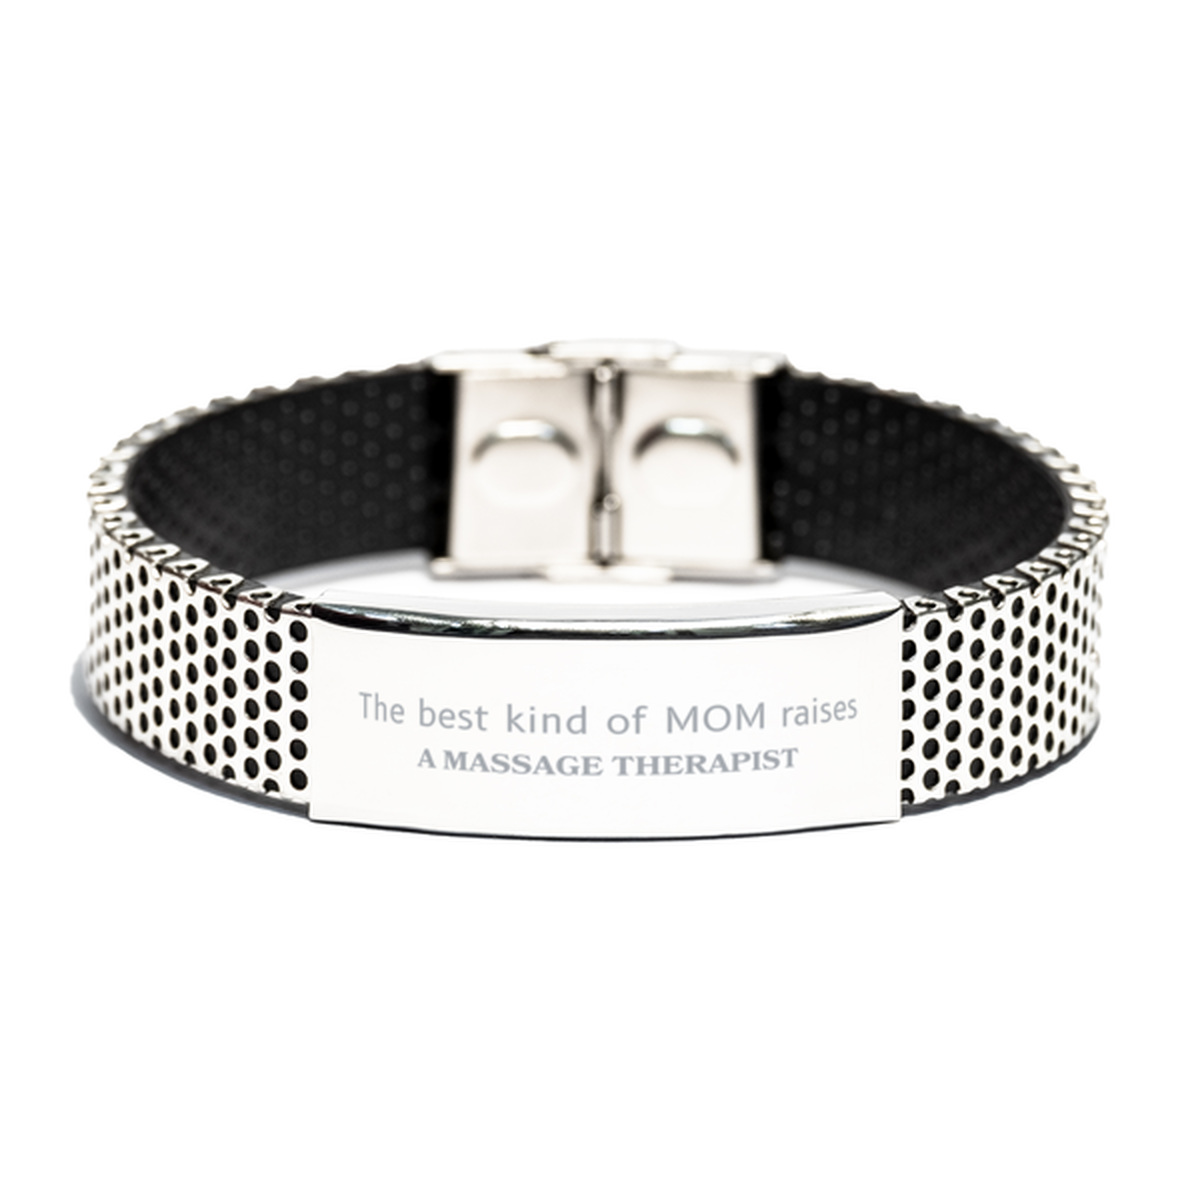 Funny Massage Therapist Mom Gifts, The best kind of MOM raises Massage Therapist, Birthday, Mother's Day, Cute Stainless Steel Bracelet for Massage Therapist Mom